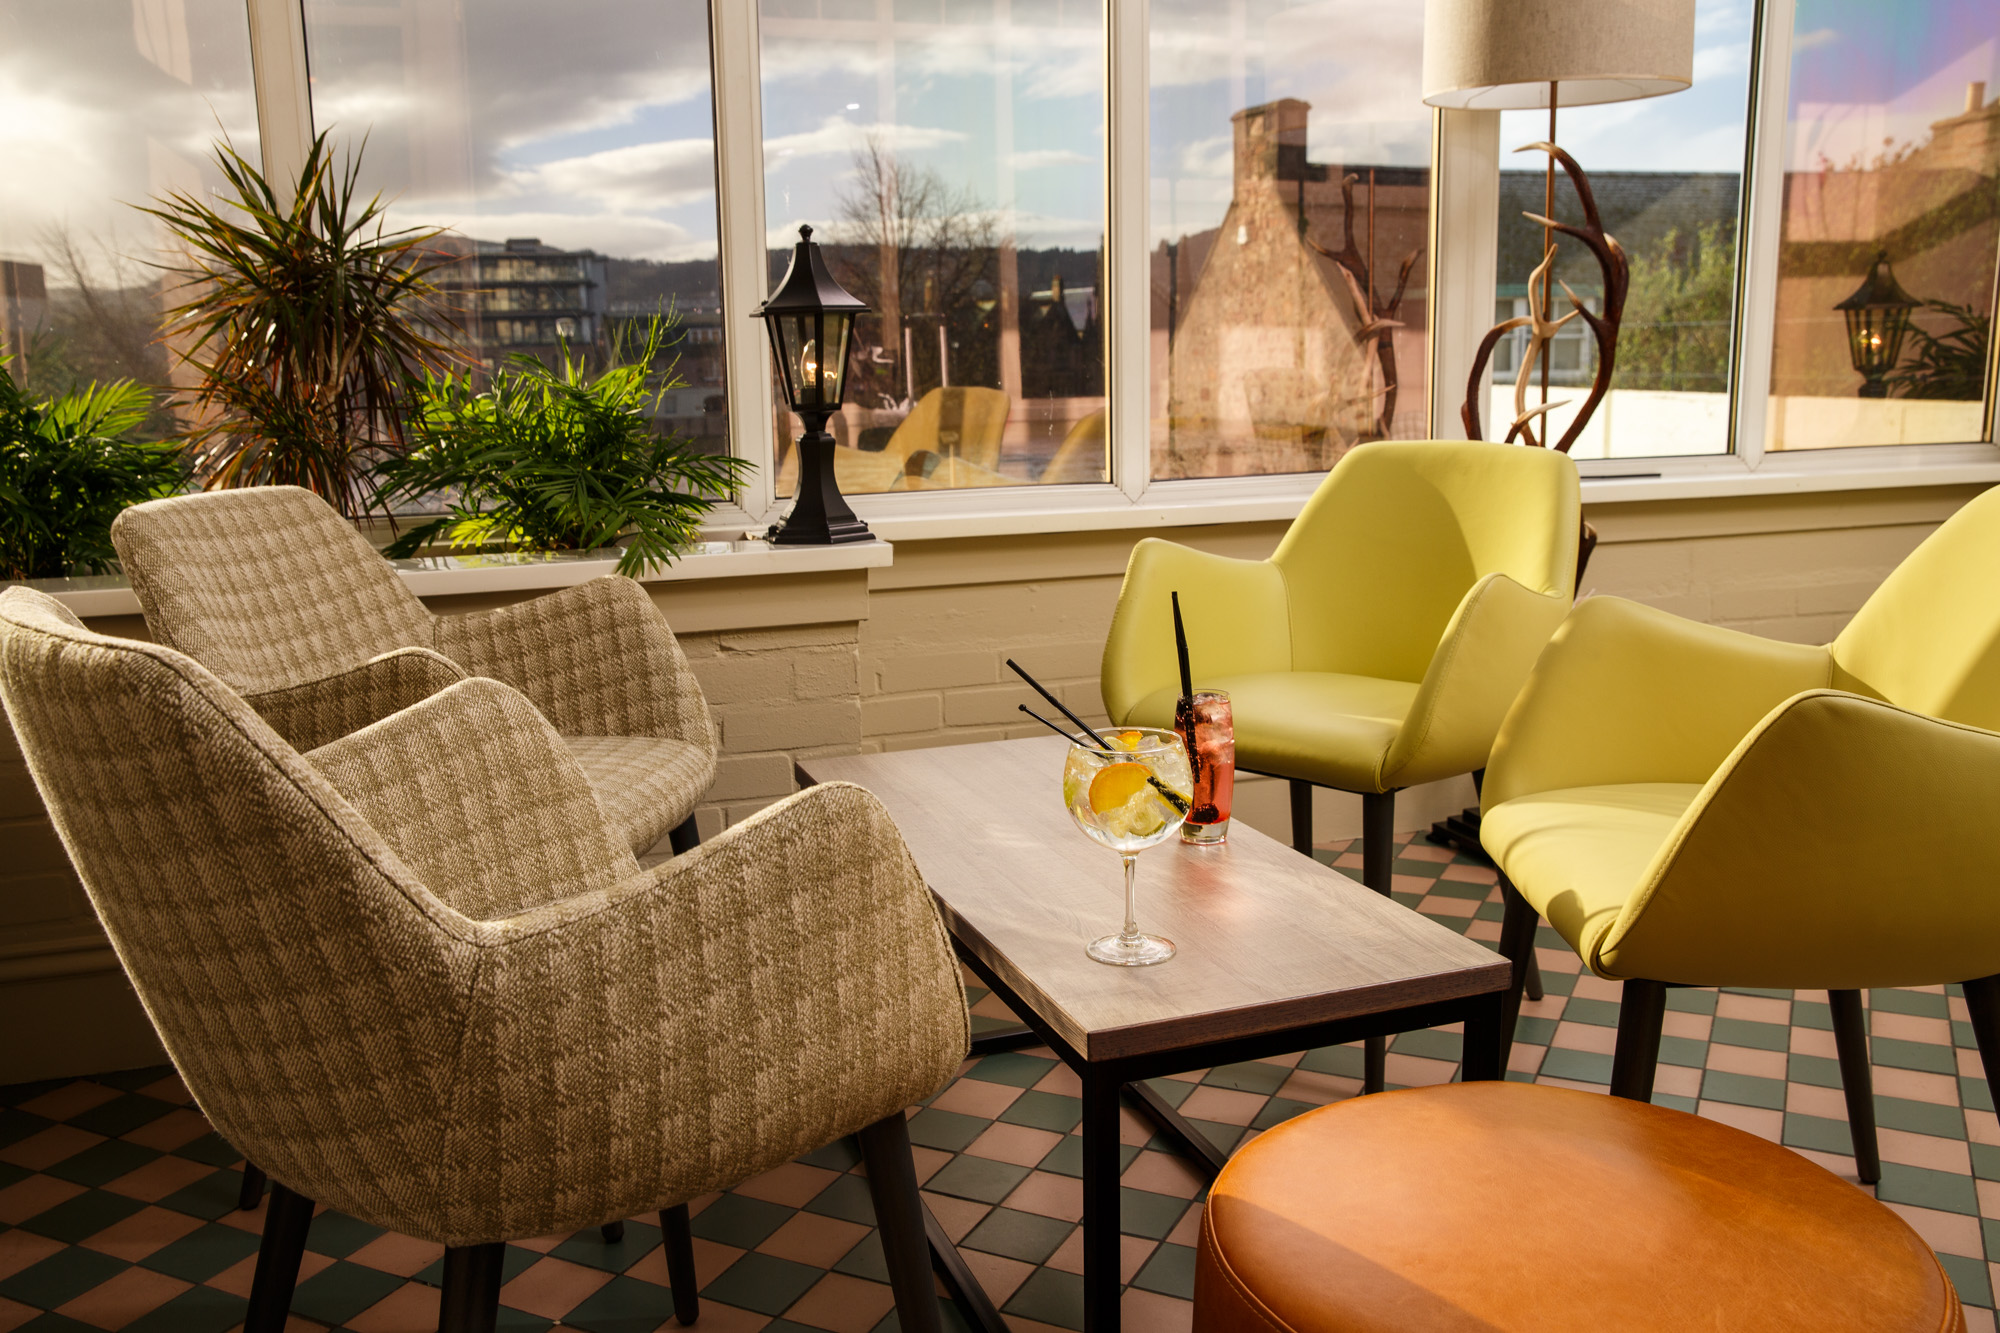 Drinks on a table in the conservatory overlooking the river ness at mercure inverness hotel